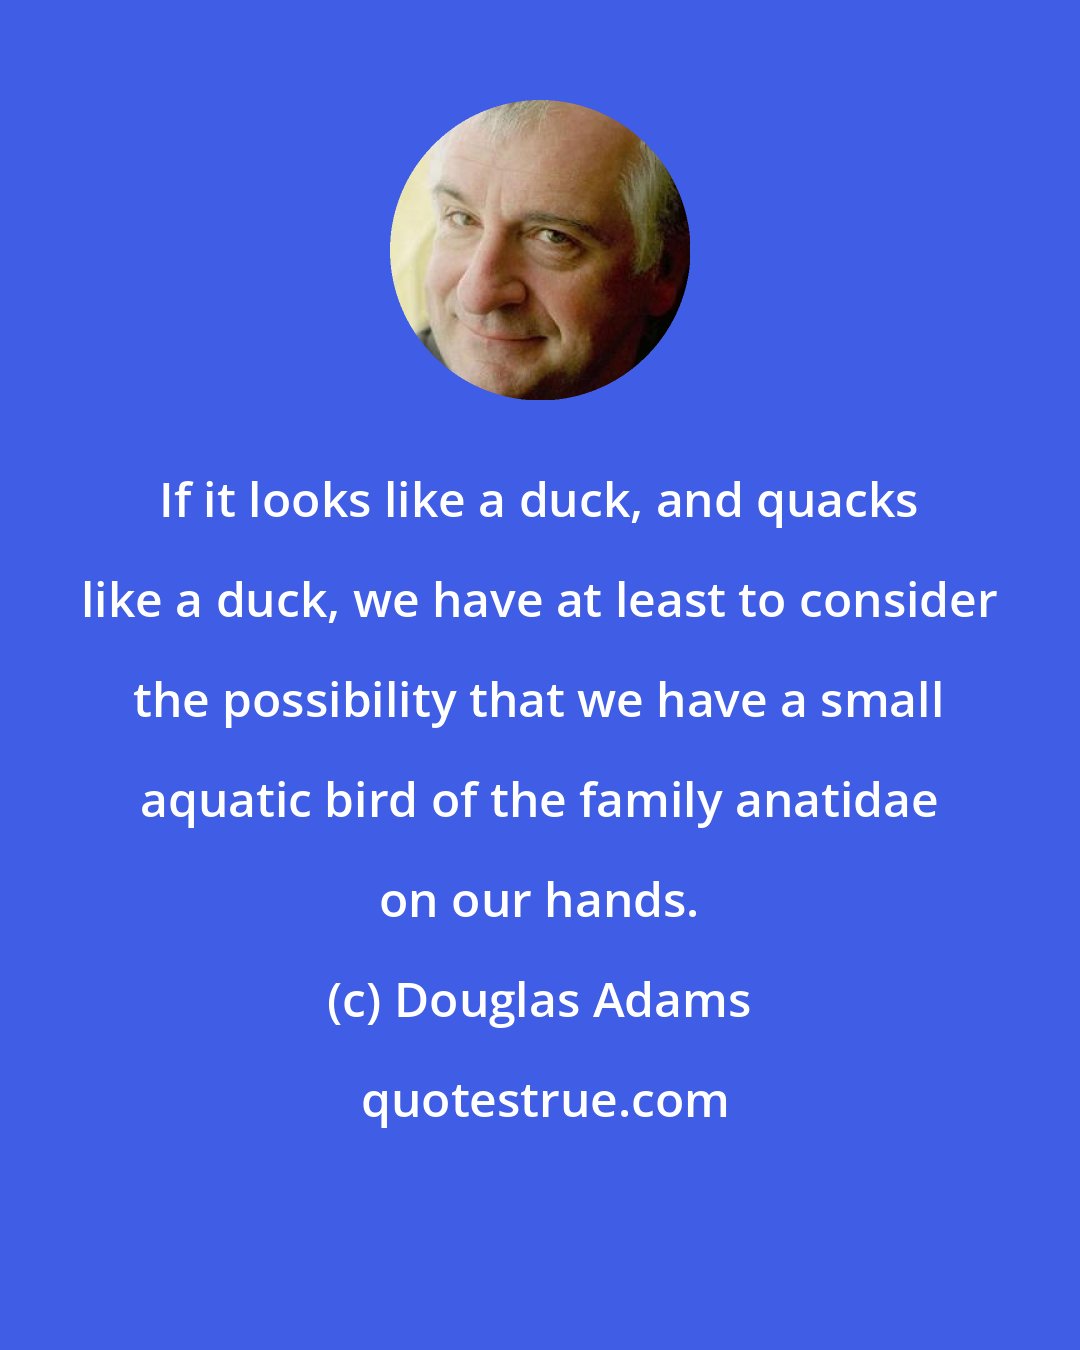 Douglas Adams: If it looks like a duck, and quacks like a duck, we have at least to consider the possibility that we have a small aquatic bird of the family anatidae on our hands.